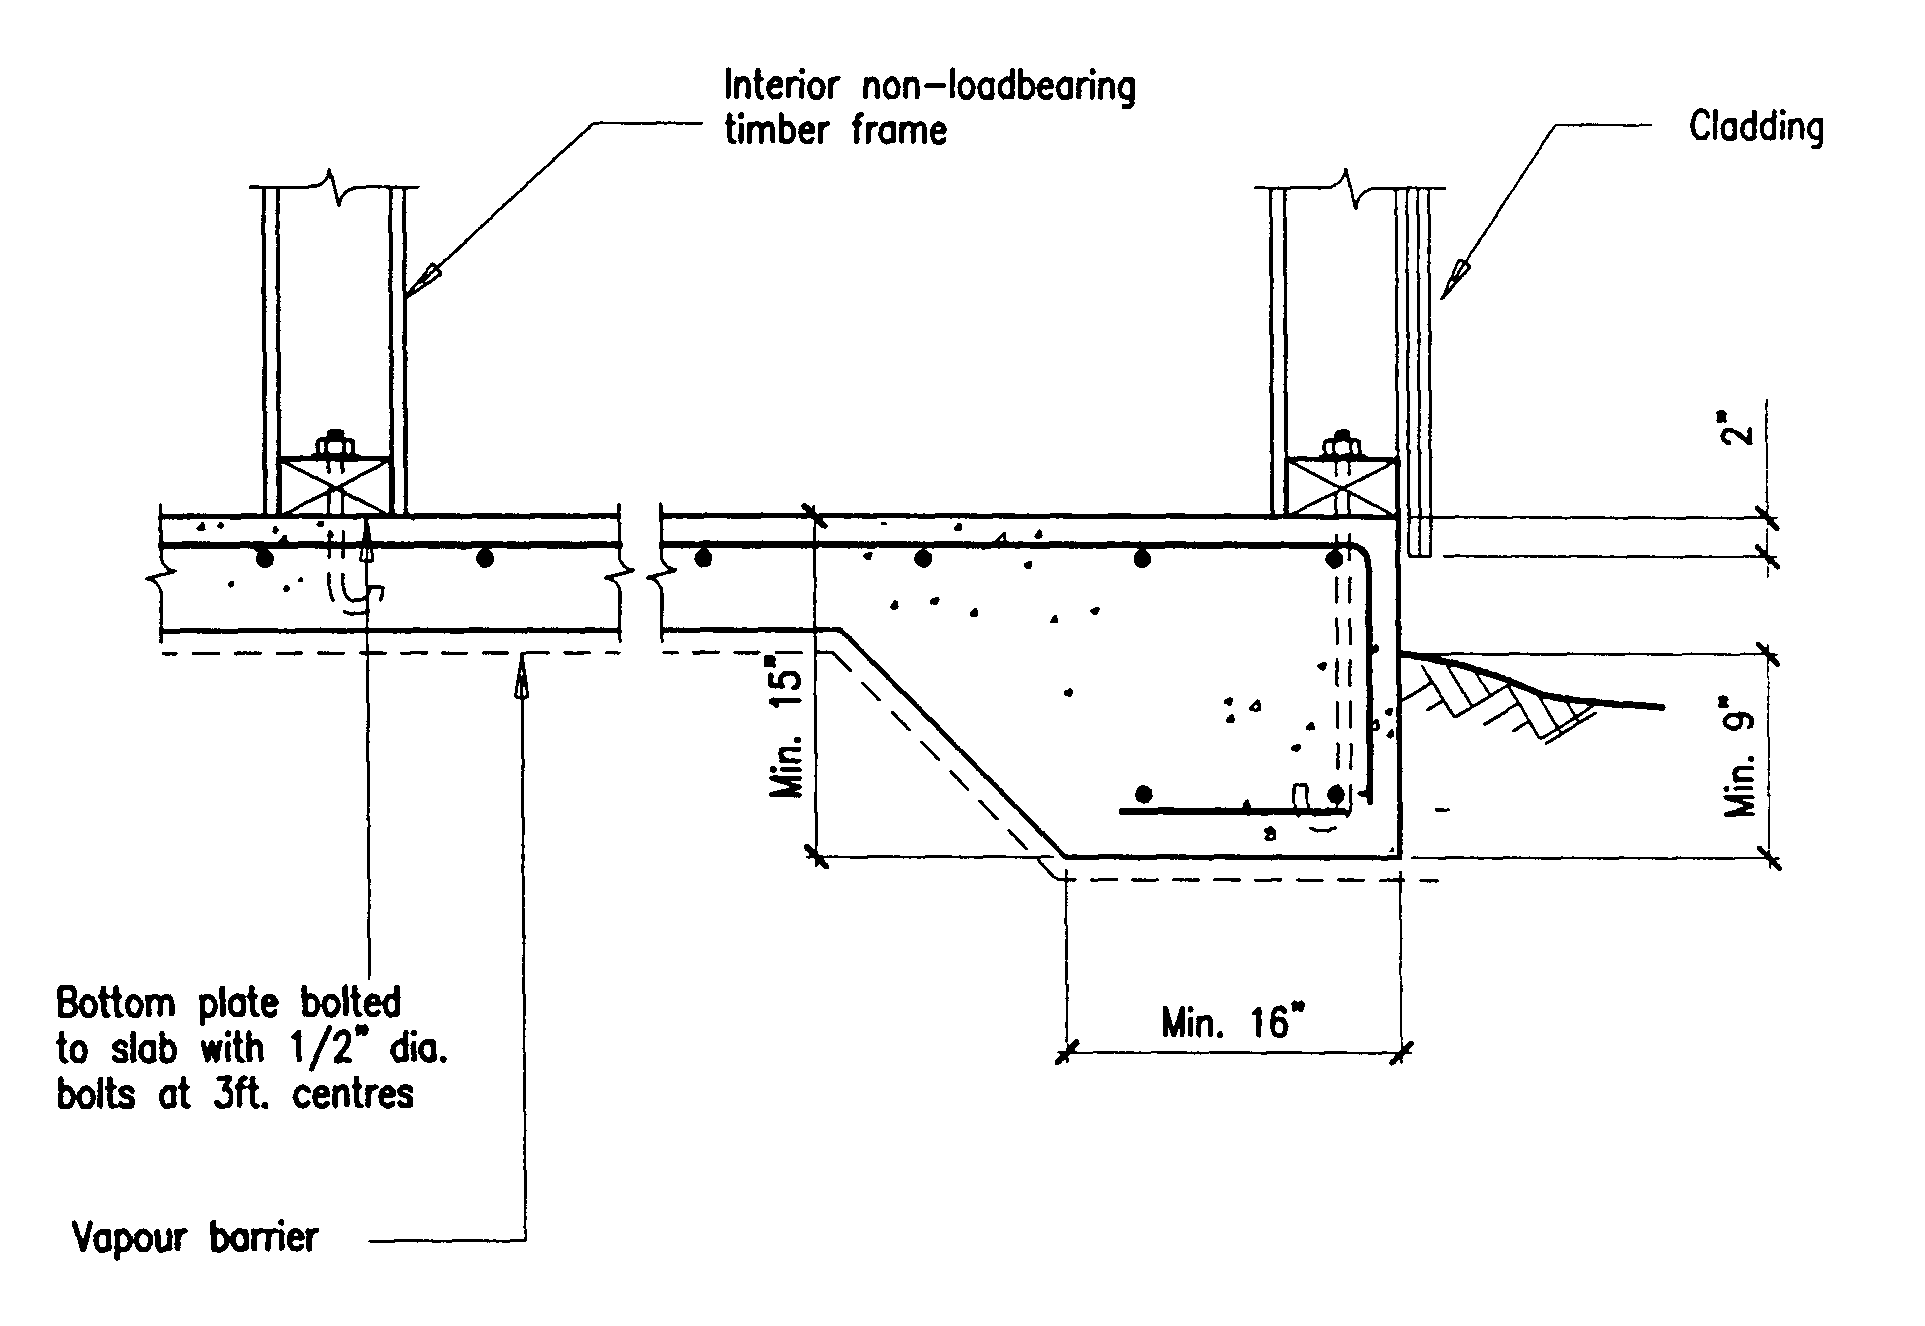 Building Guidelines Drawings. Section B: Concrete Construction